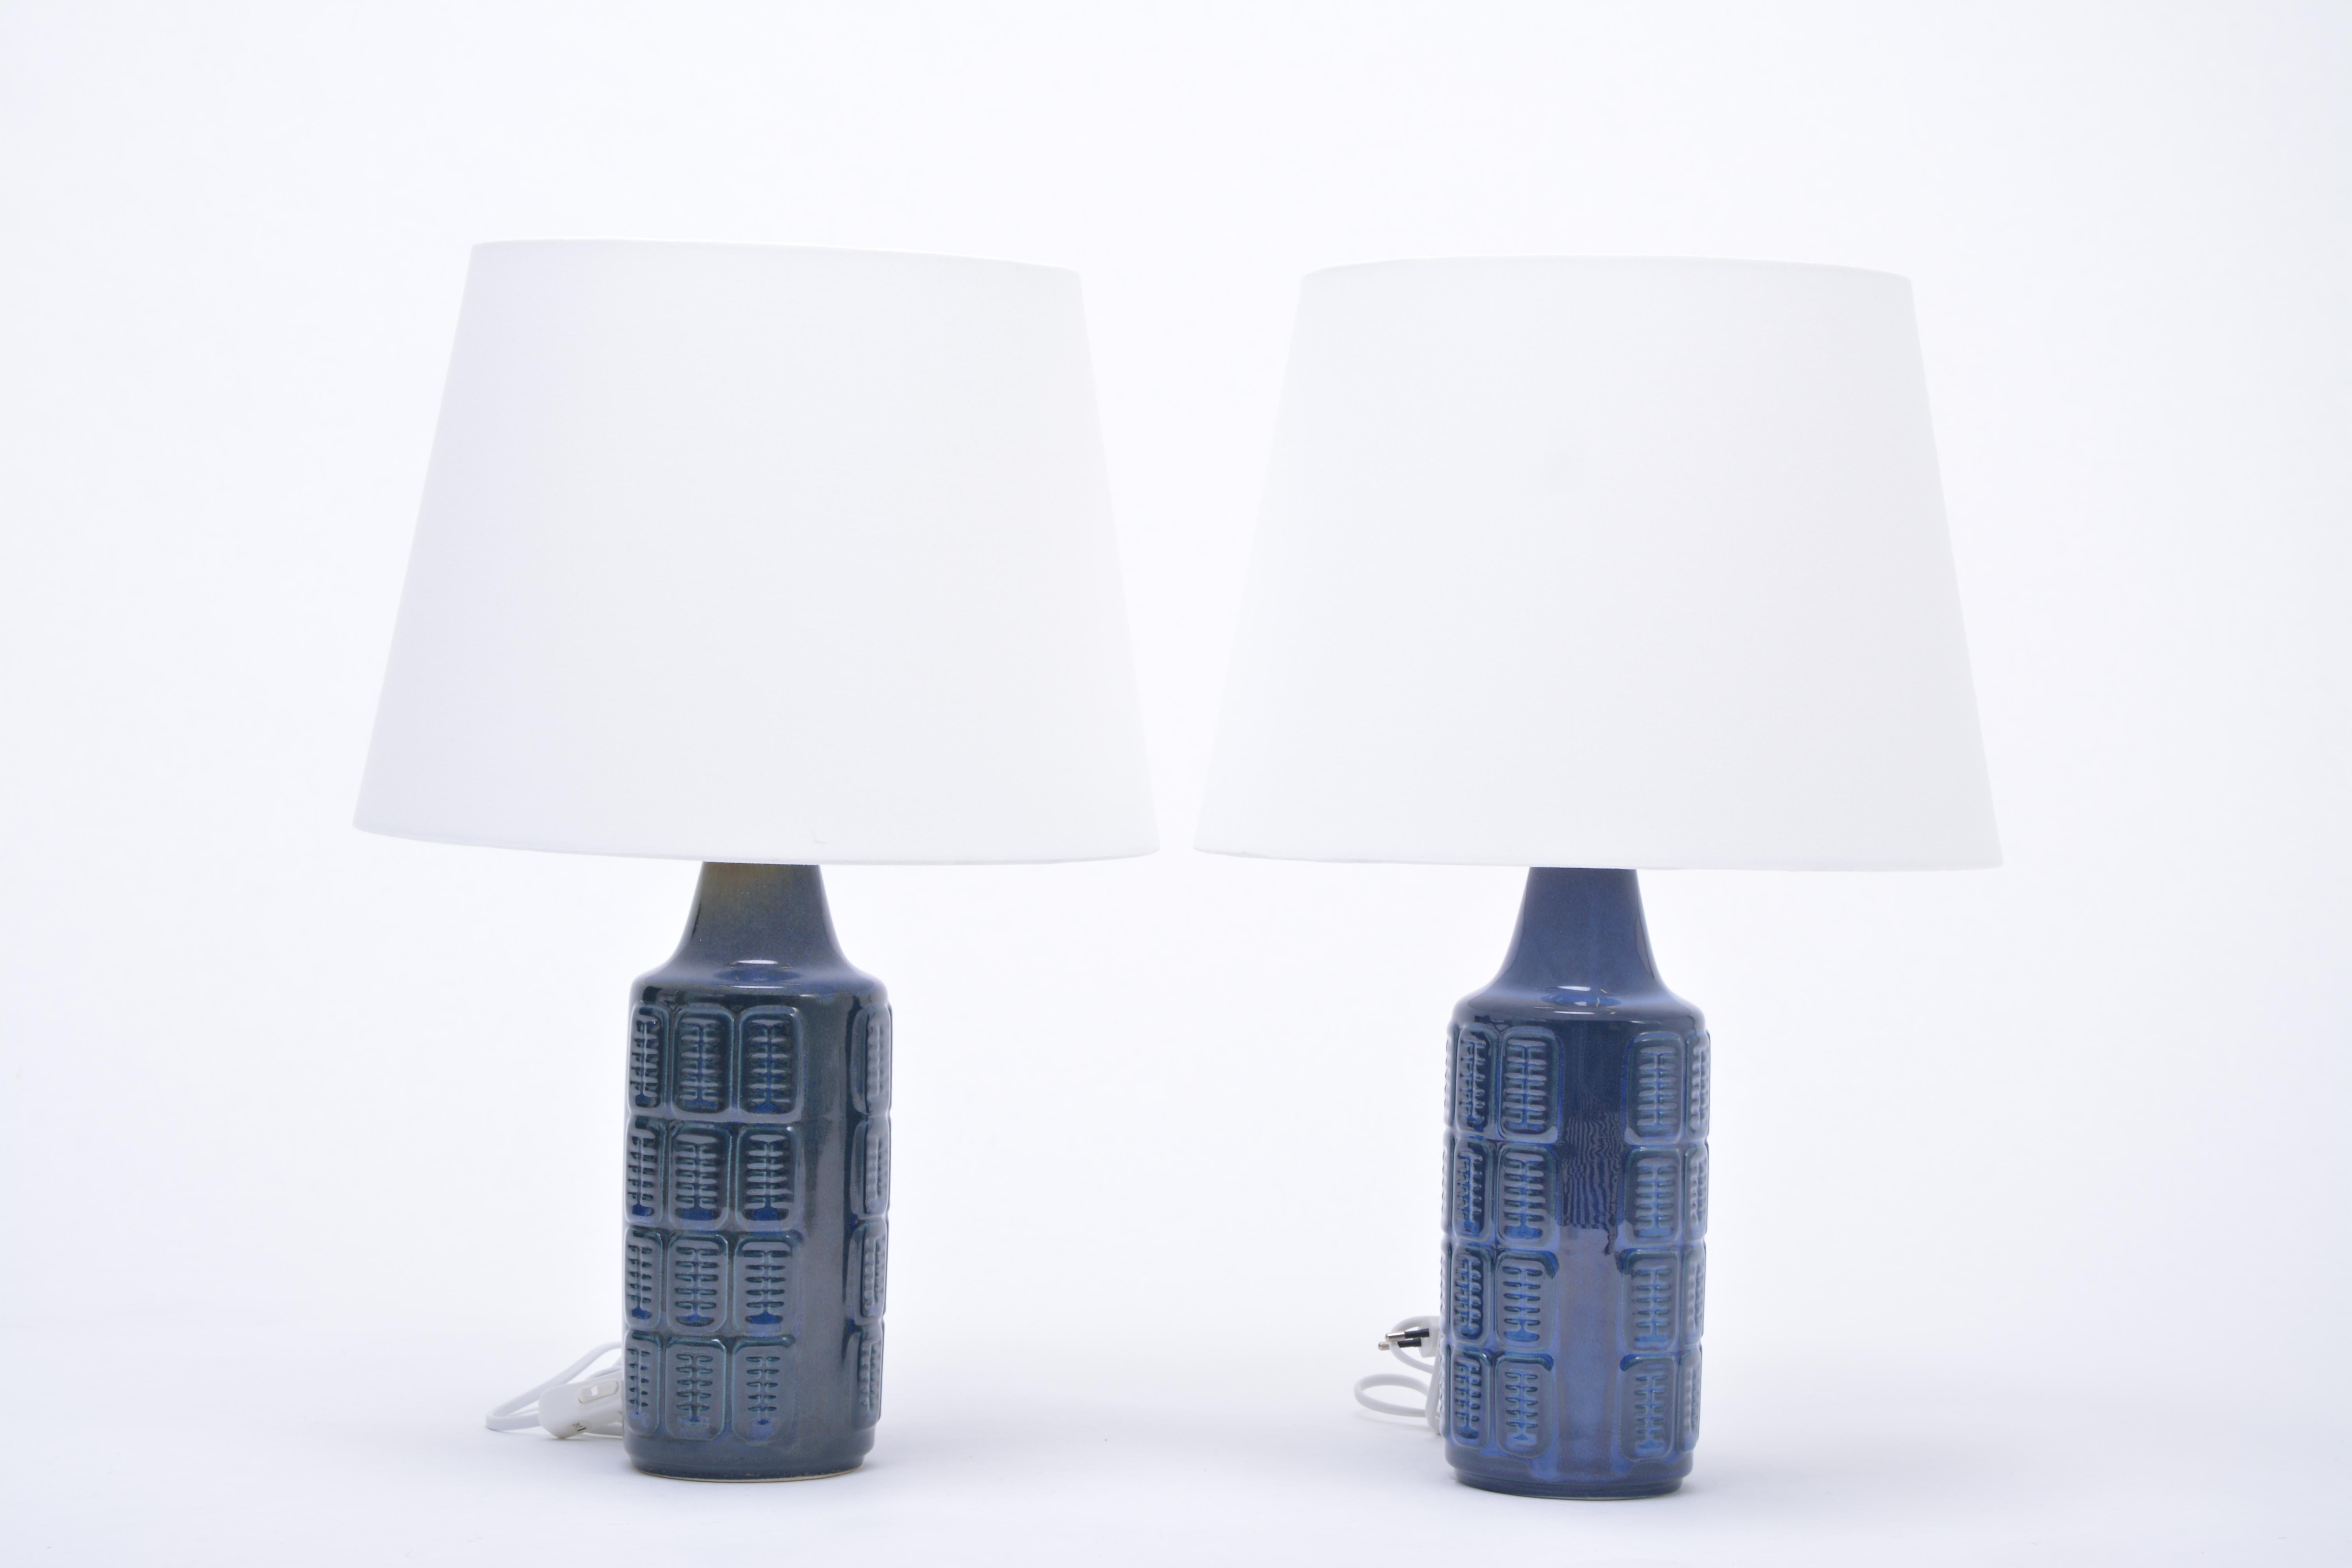 Pair of blue Mid-Century Modern stoneware lamps by Einar Johansen for Søholm

Pair of blue table lamps made of stoneware with ceramic glazing in dark blue. The bases feature a graphic pattern. Produced by Danish company Søholm. The lamps have been